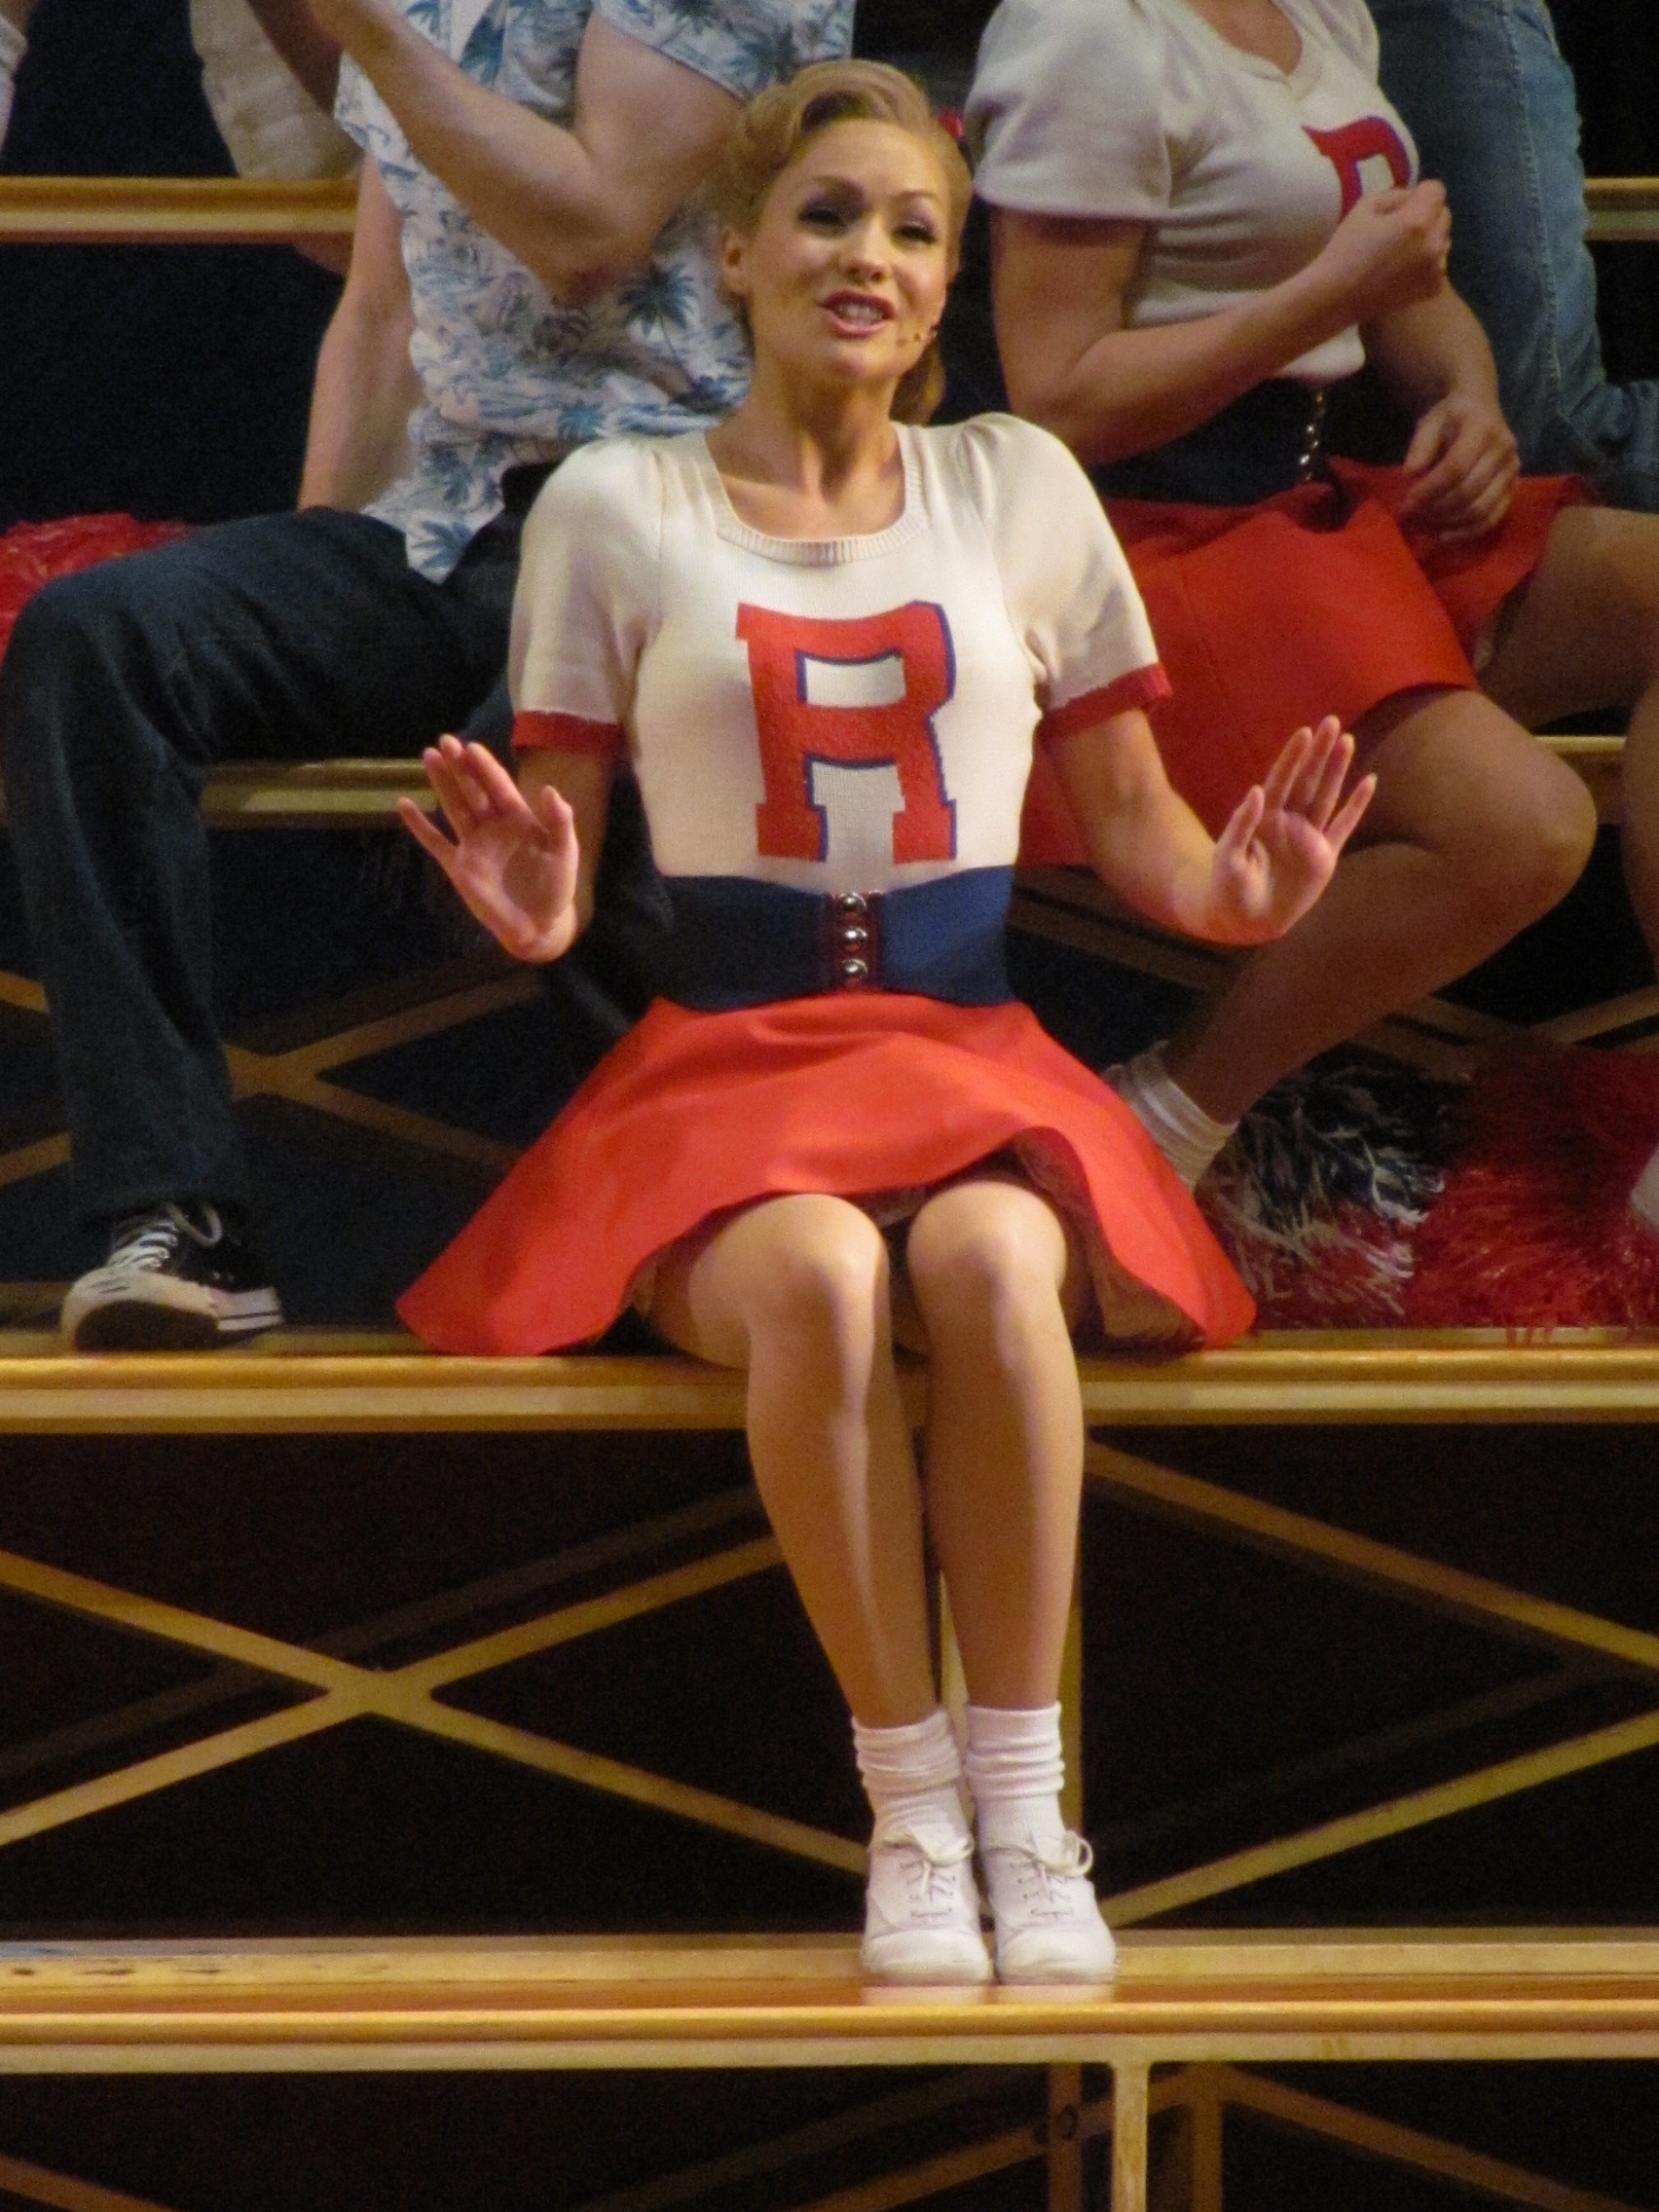 Playing 'Patty Simcox' in 'Grease' at The Piccadilly Theatre, London 2011